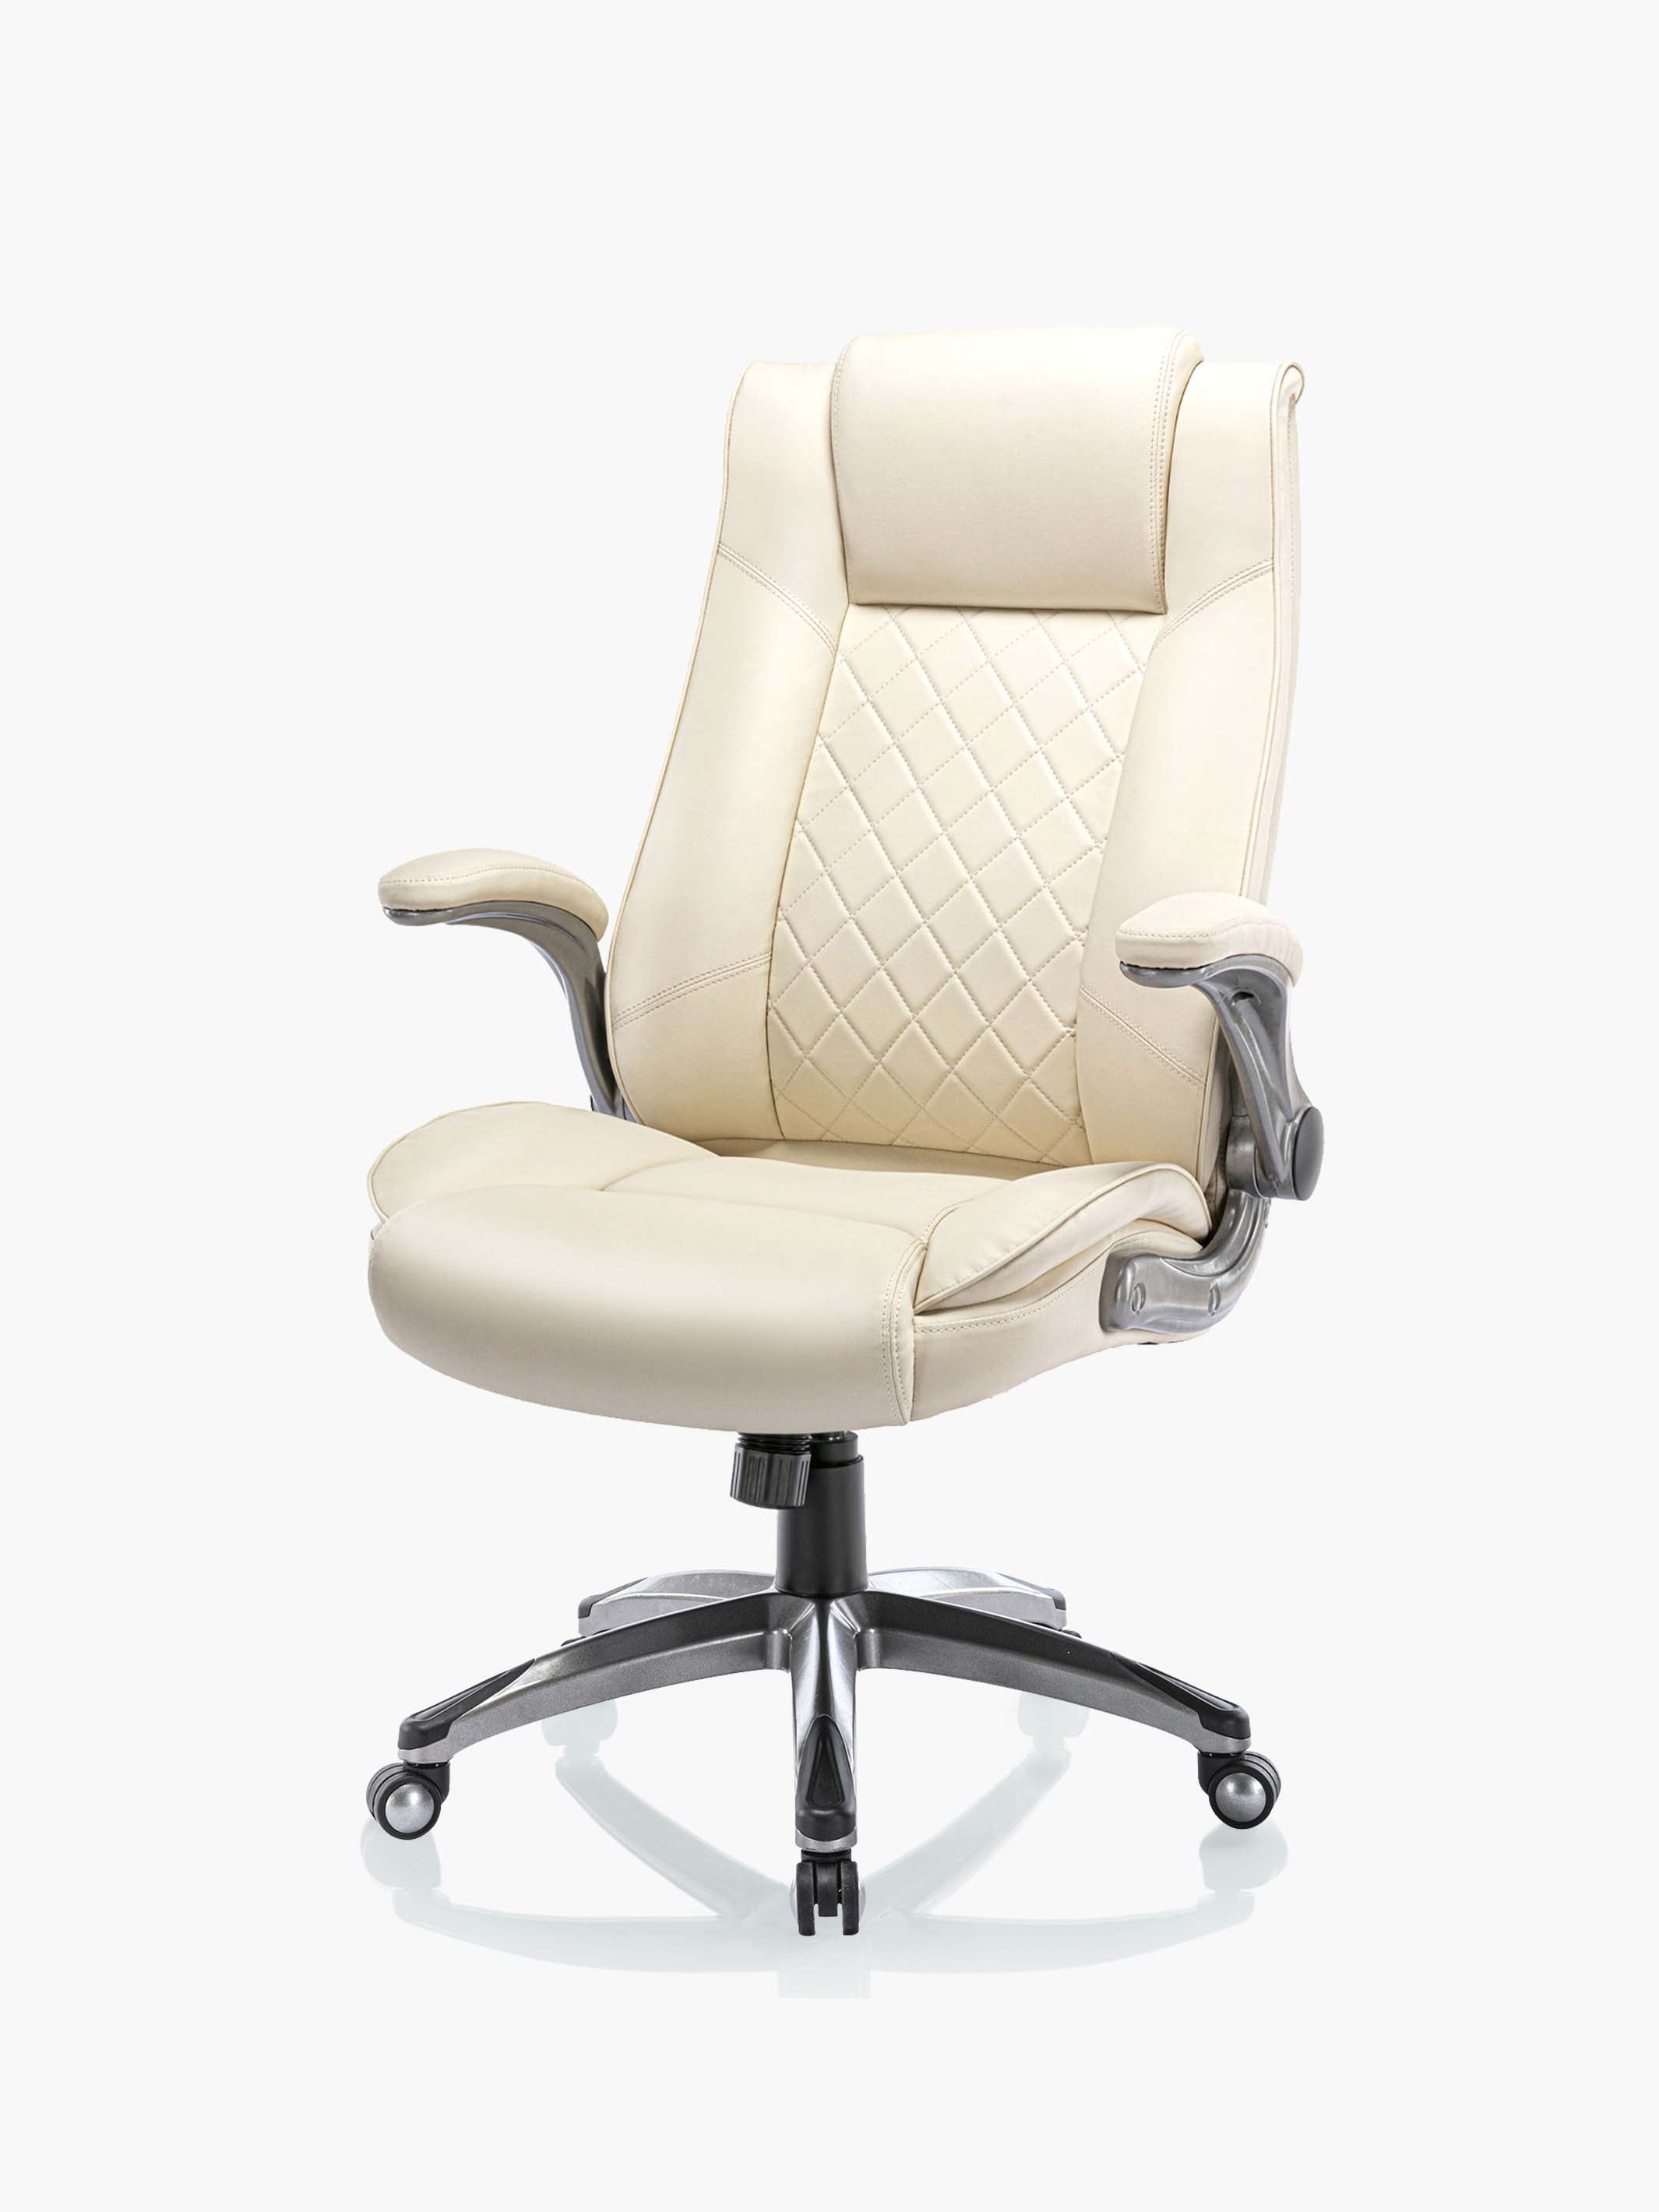 COLAMY Ergonomic High Back Leather Office Chair with Flip Up Armrests DM2199 Diamond Pattern #color_beige